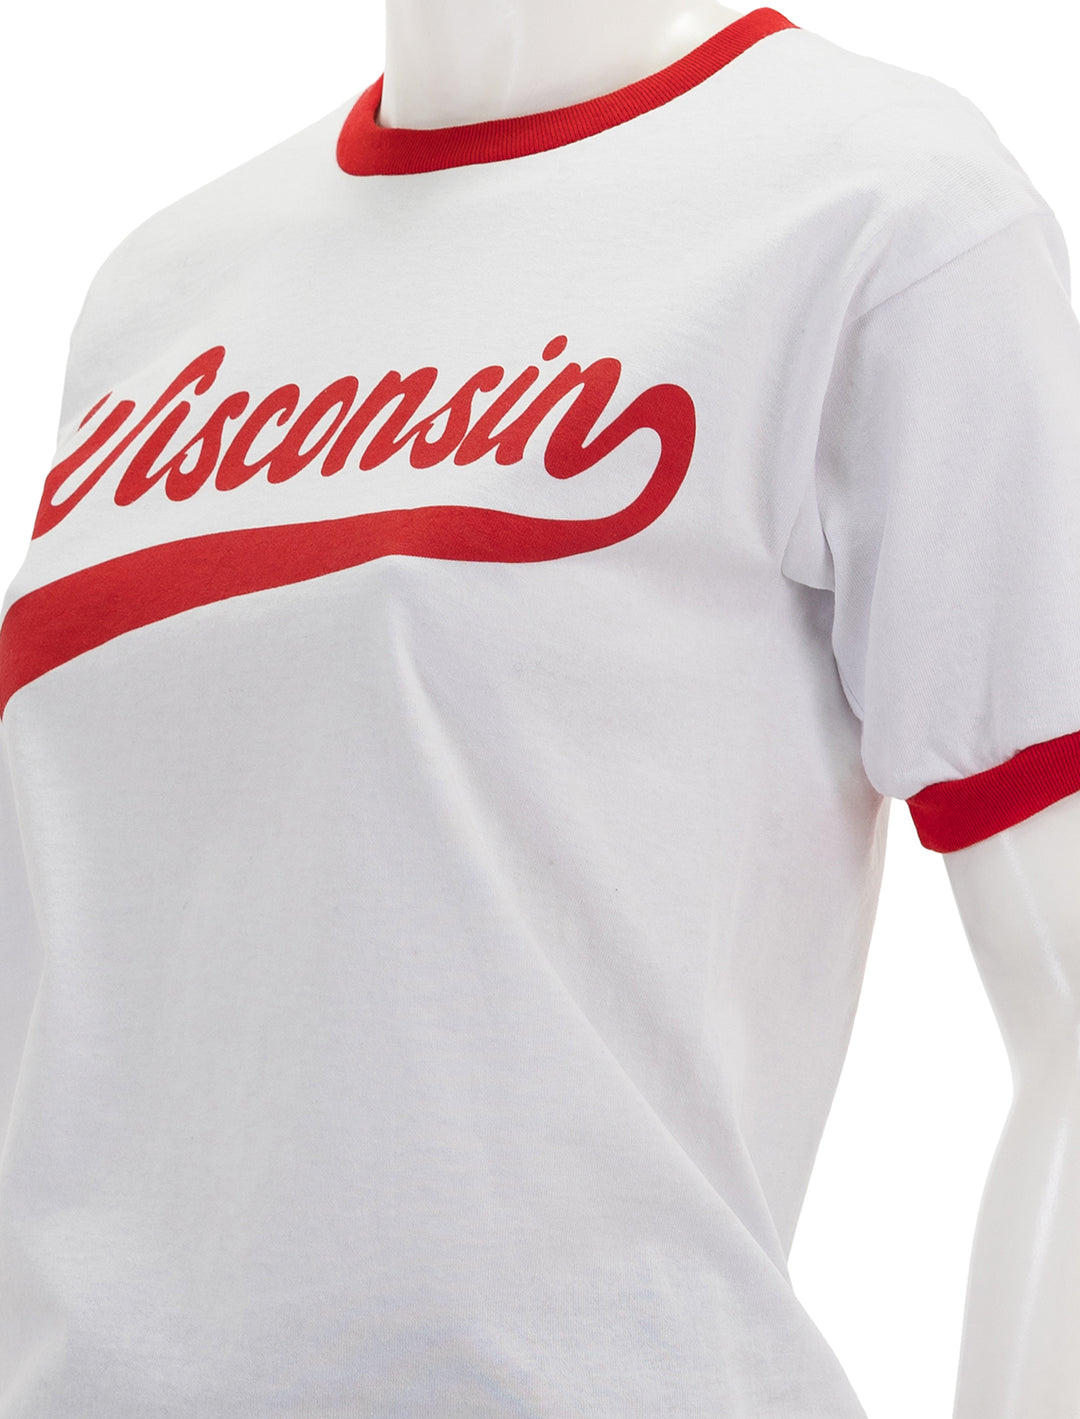 Close-up view of Recess Apparel's script ringer tee in white and red.